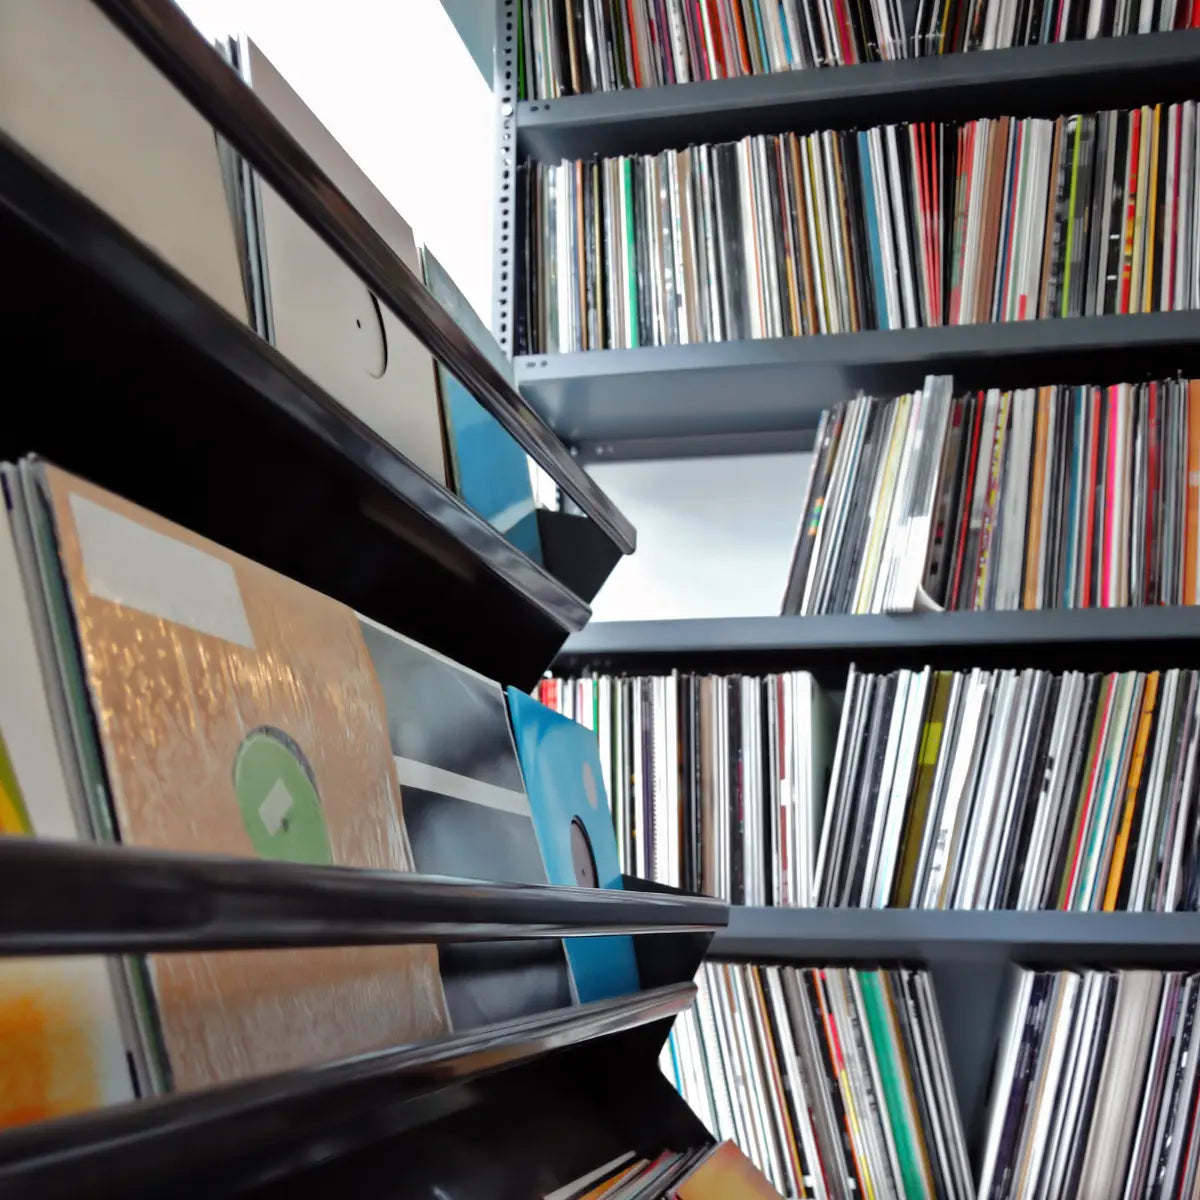 Why Vinyl Records Have Made a Surprising Return